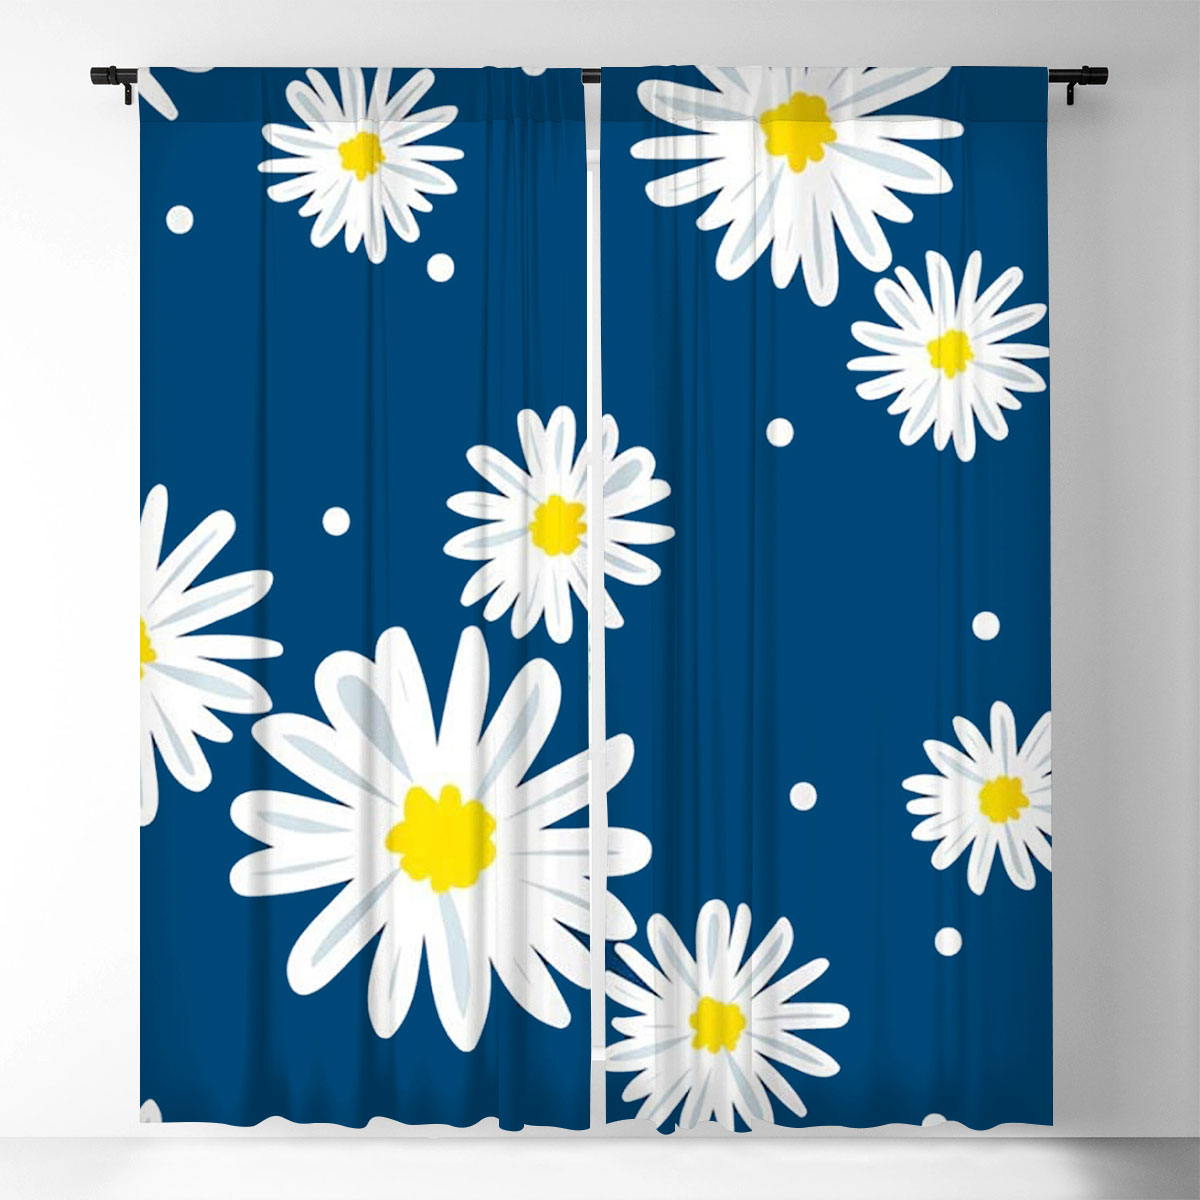 Abstract Daisy With Blue Window Curtain